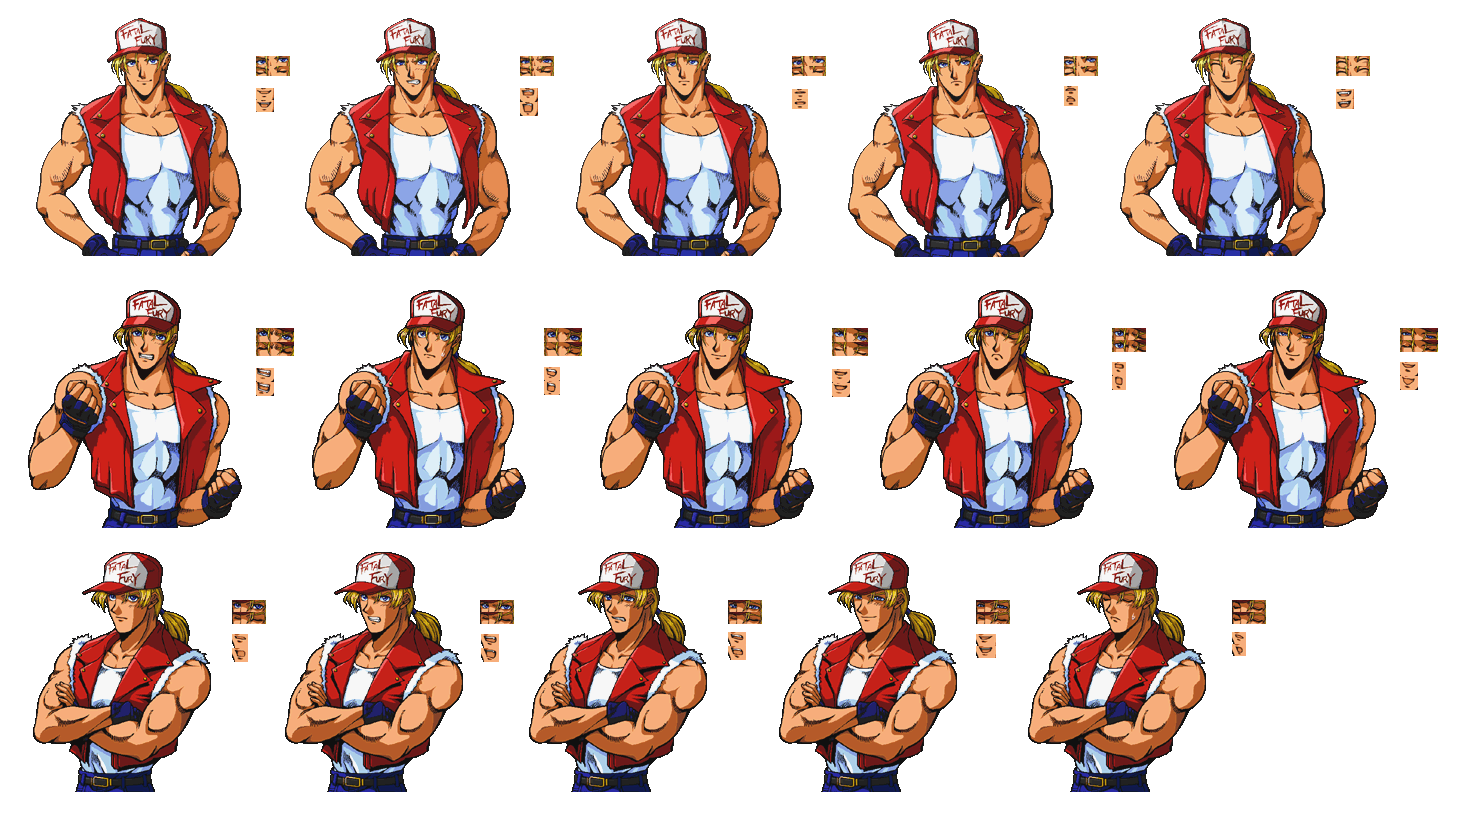 The King of Fighters: Kyo (JPN) - Terry Bogard